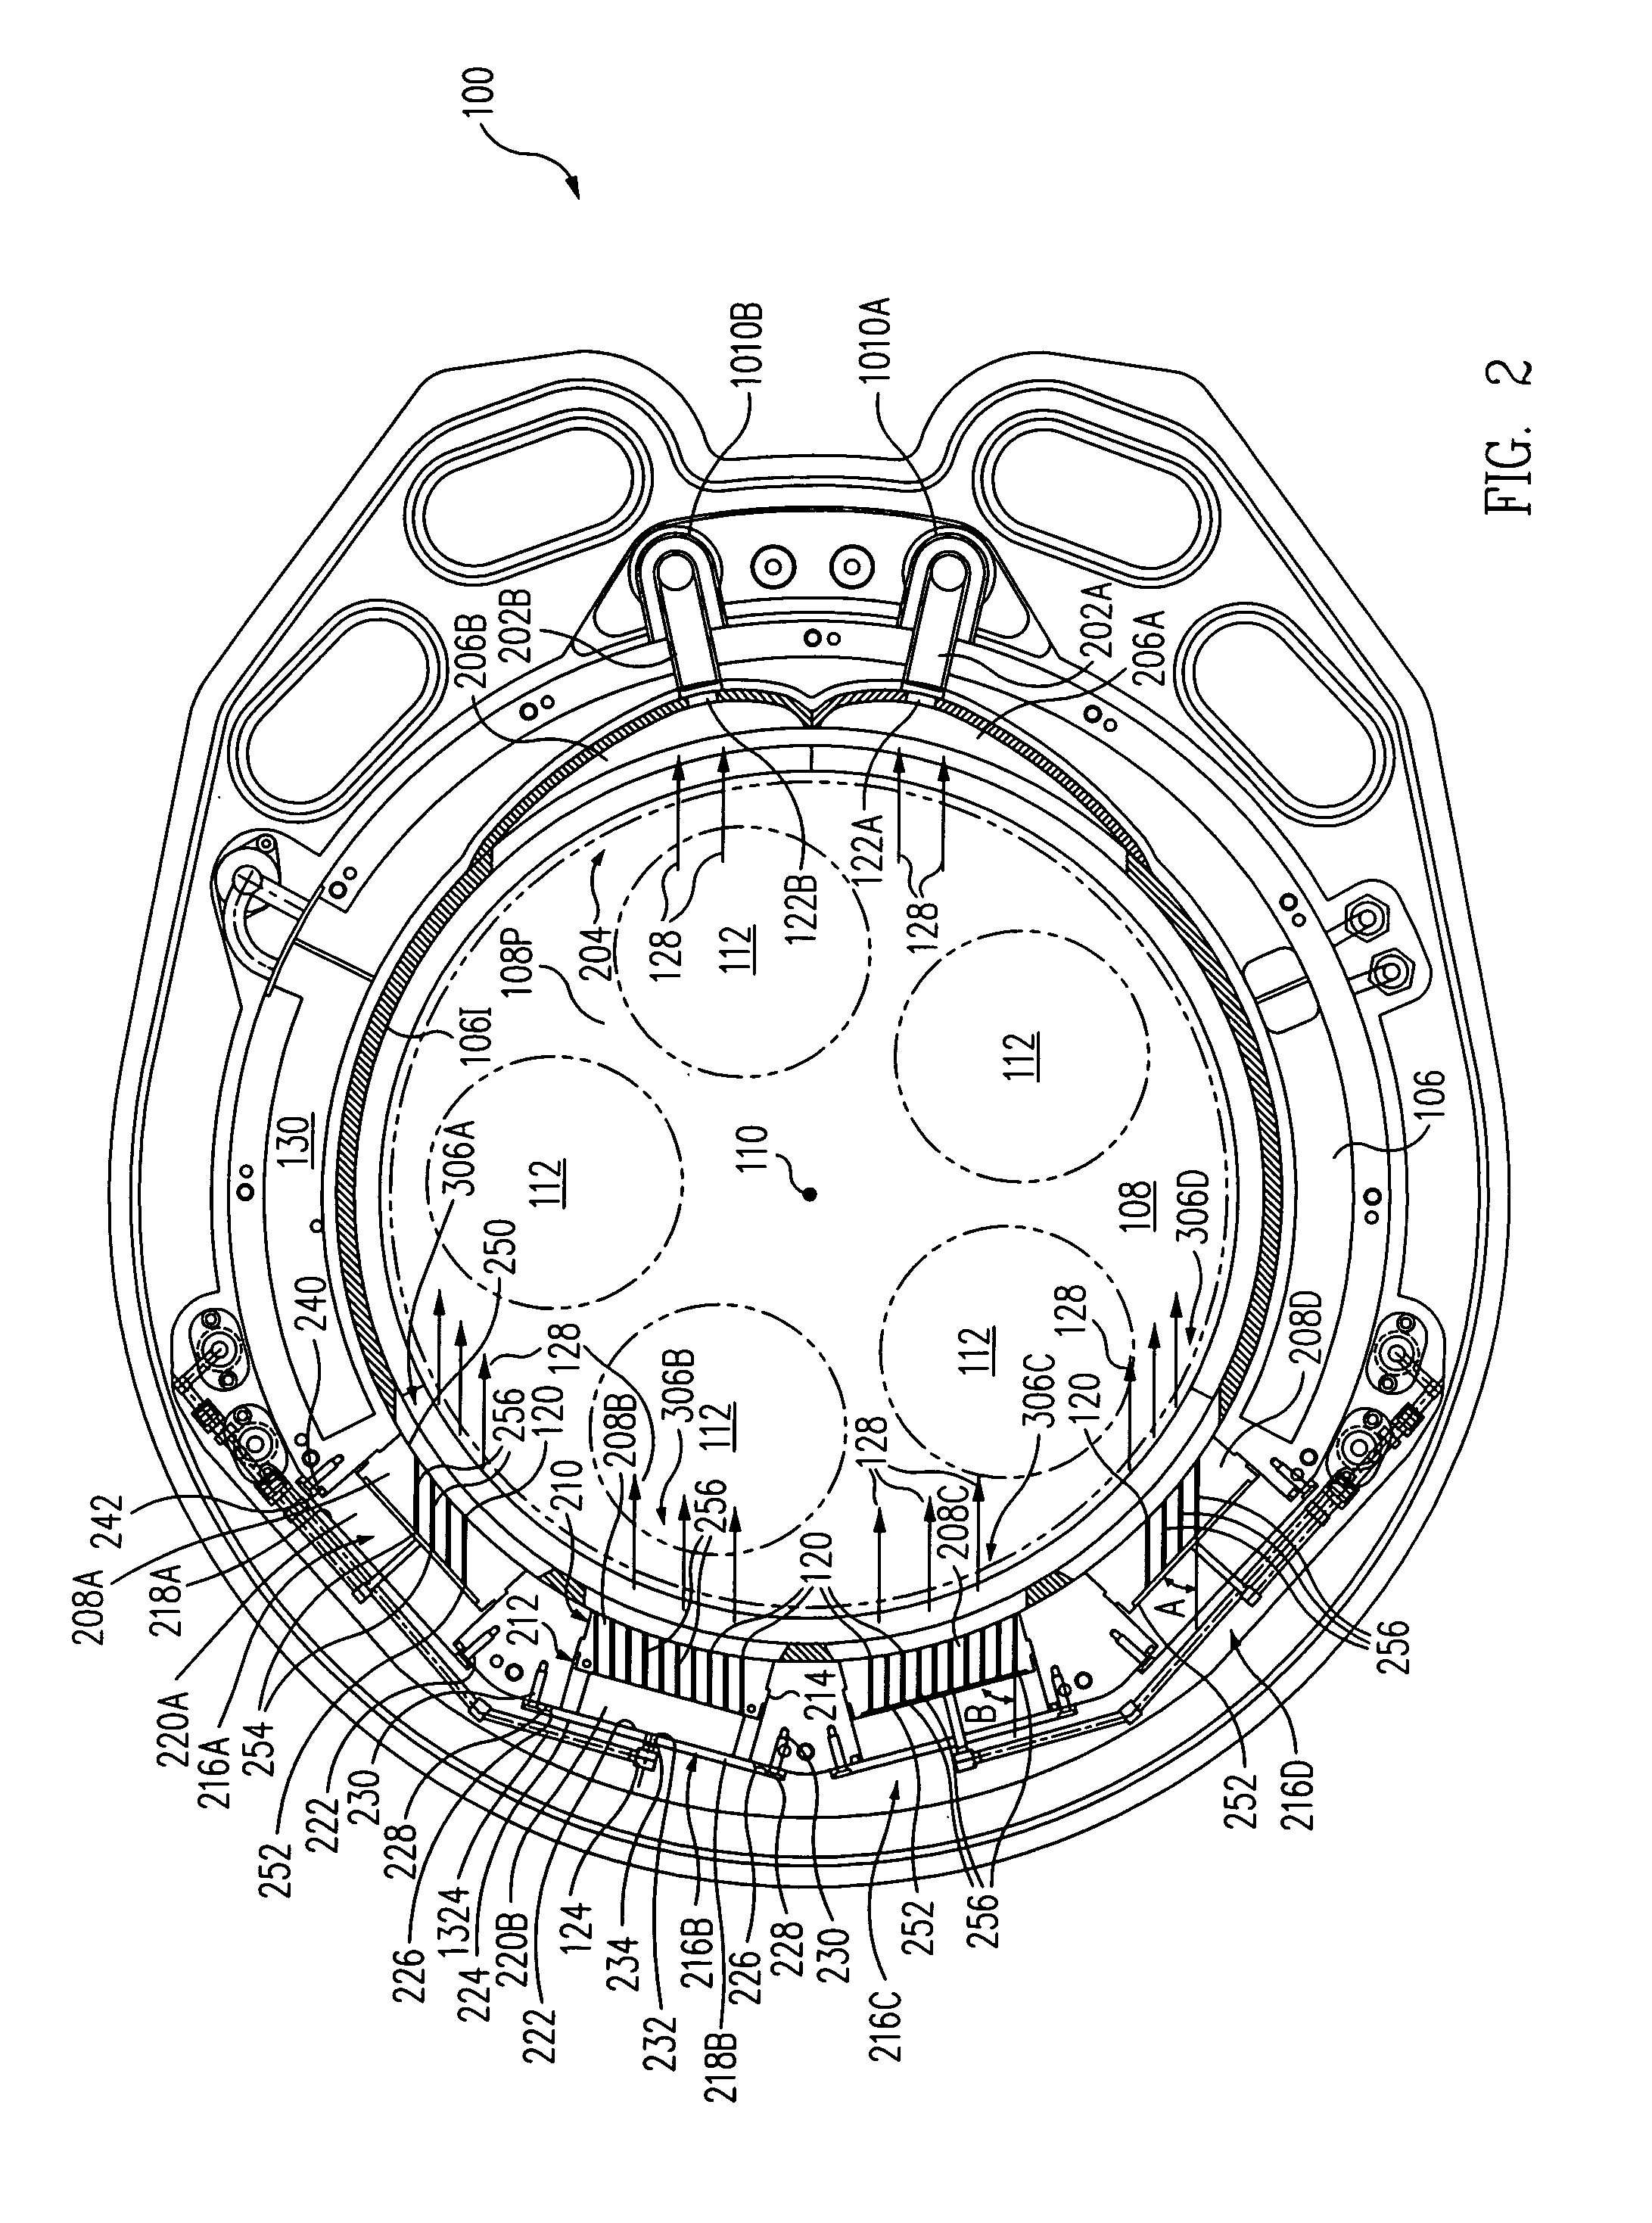 Gas ring and method of processing substrates